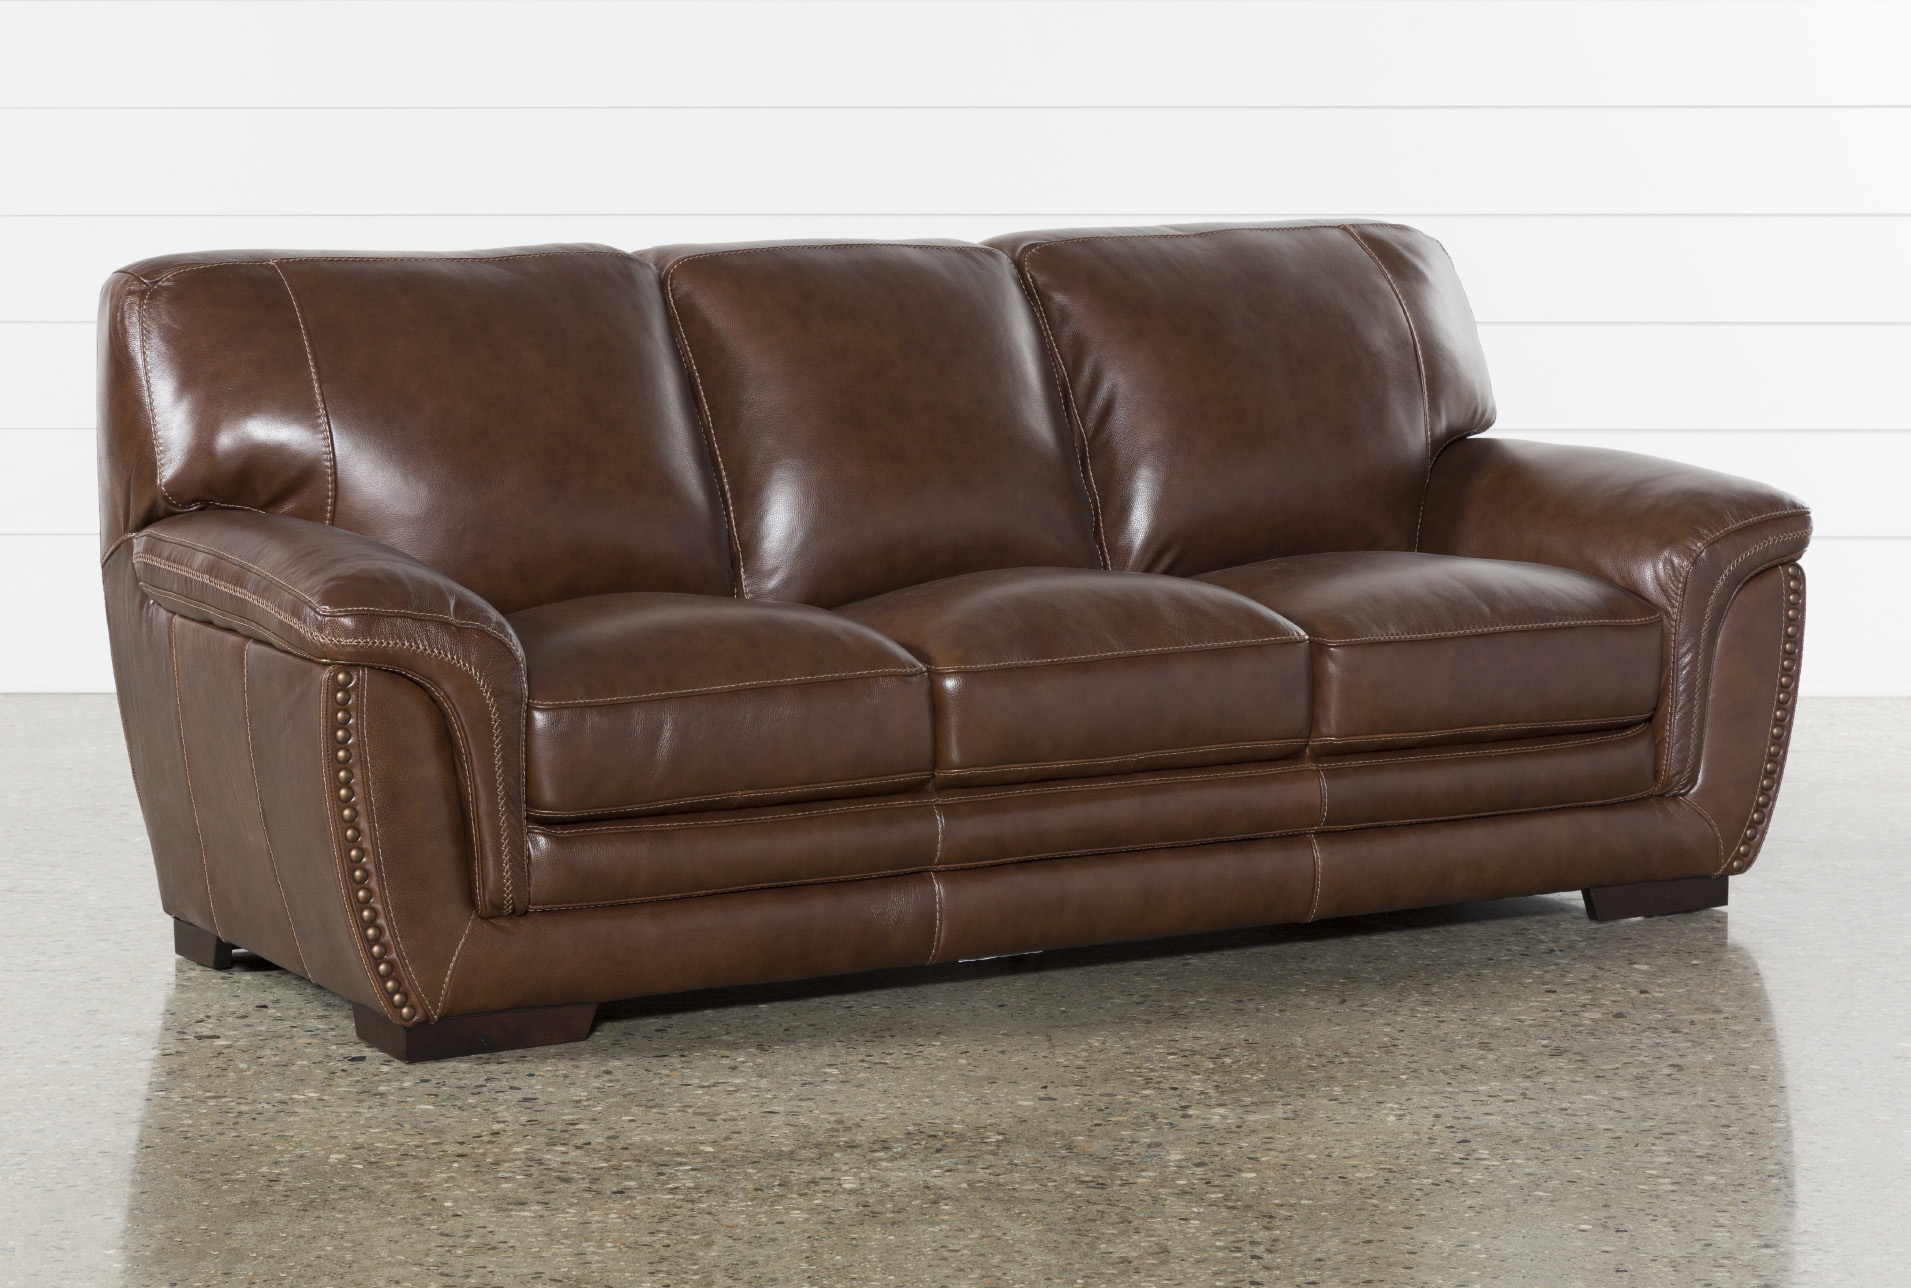 brown fabric sofa and brown leather chair decor